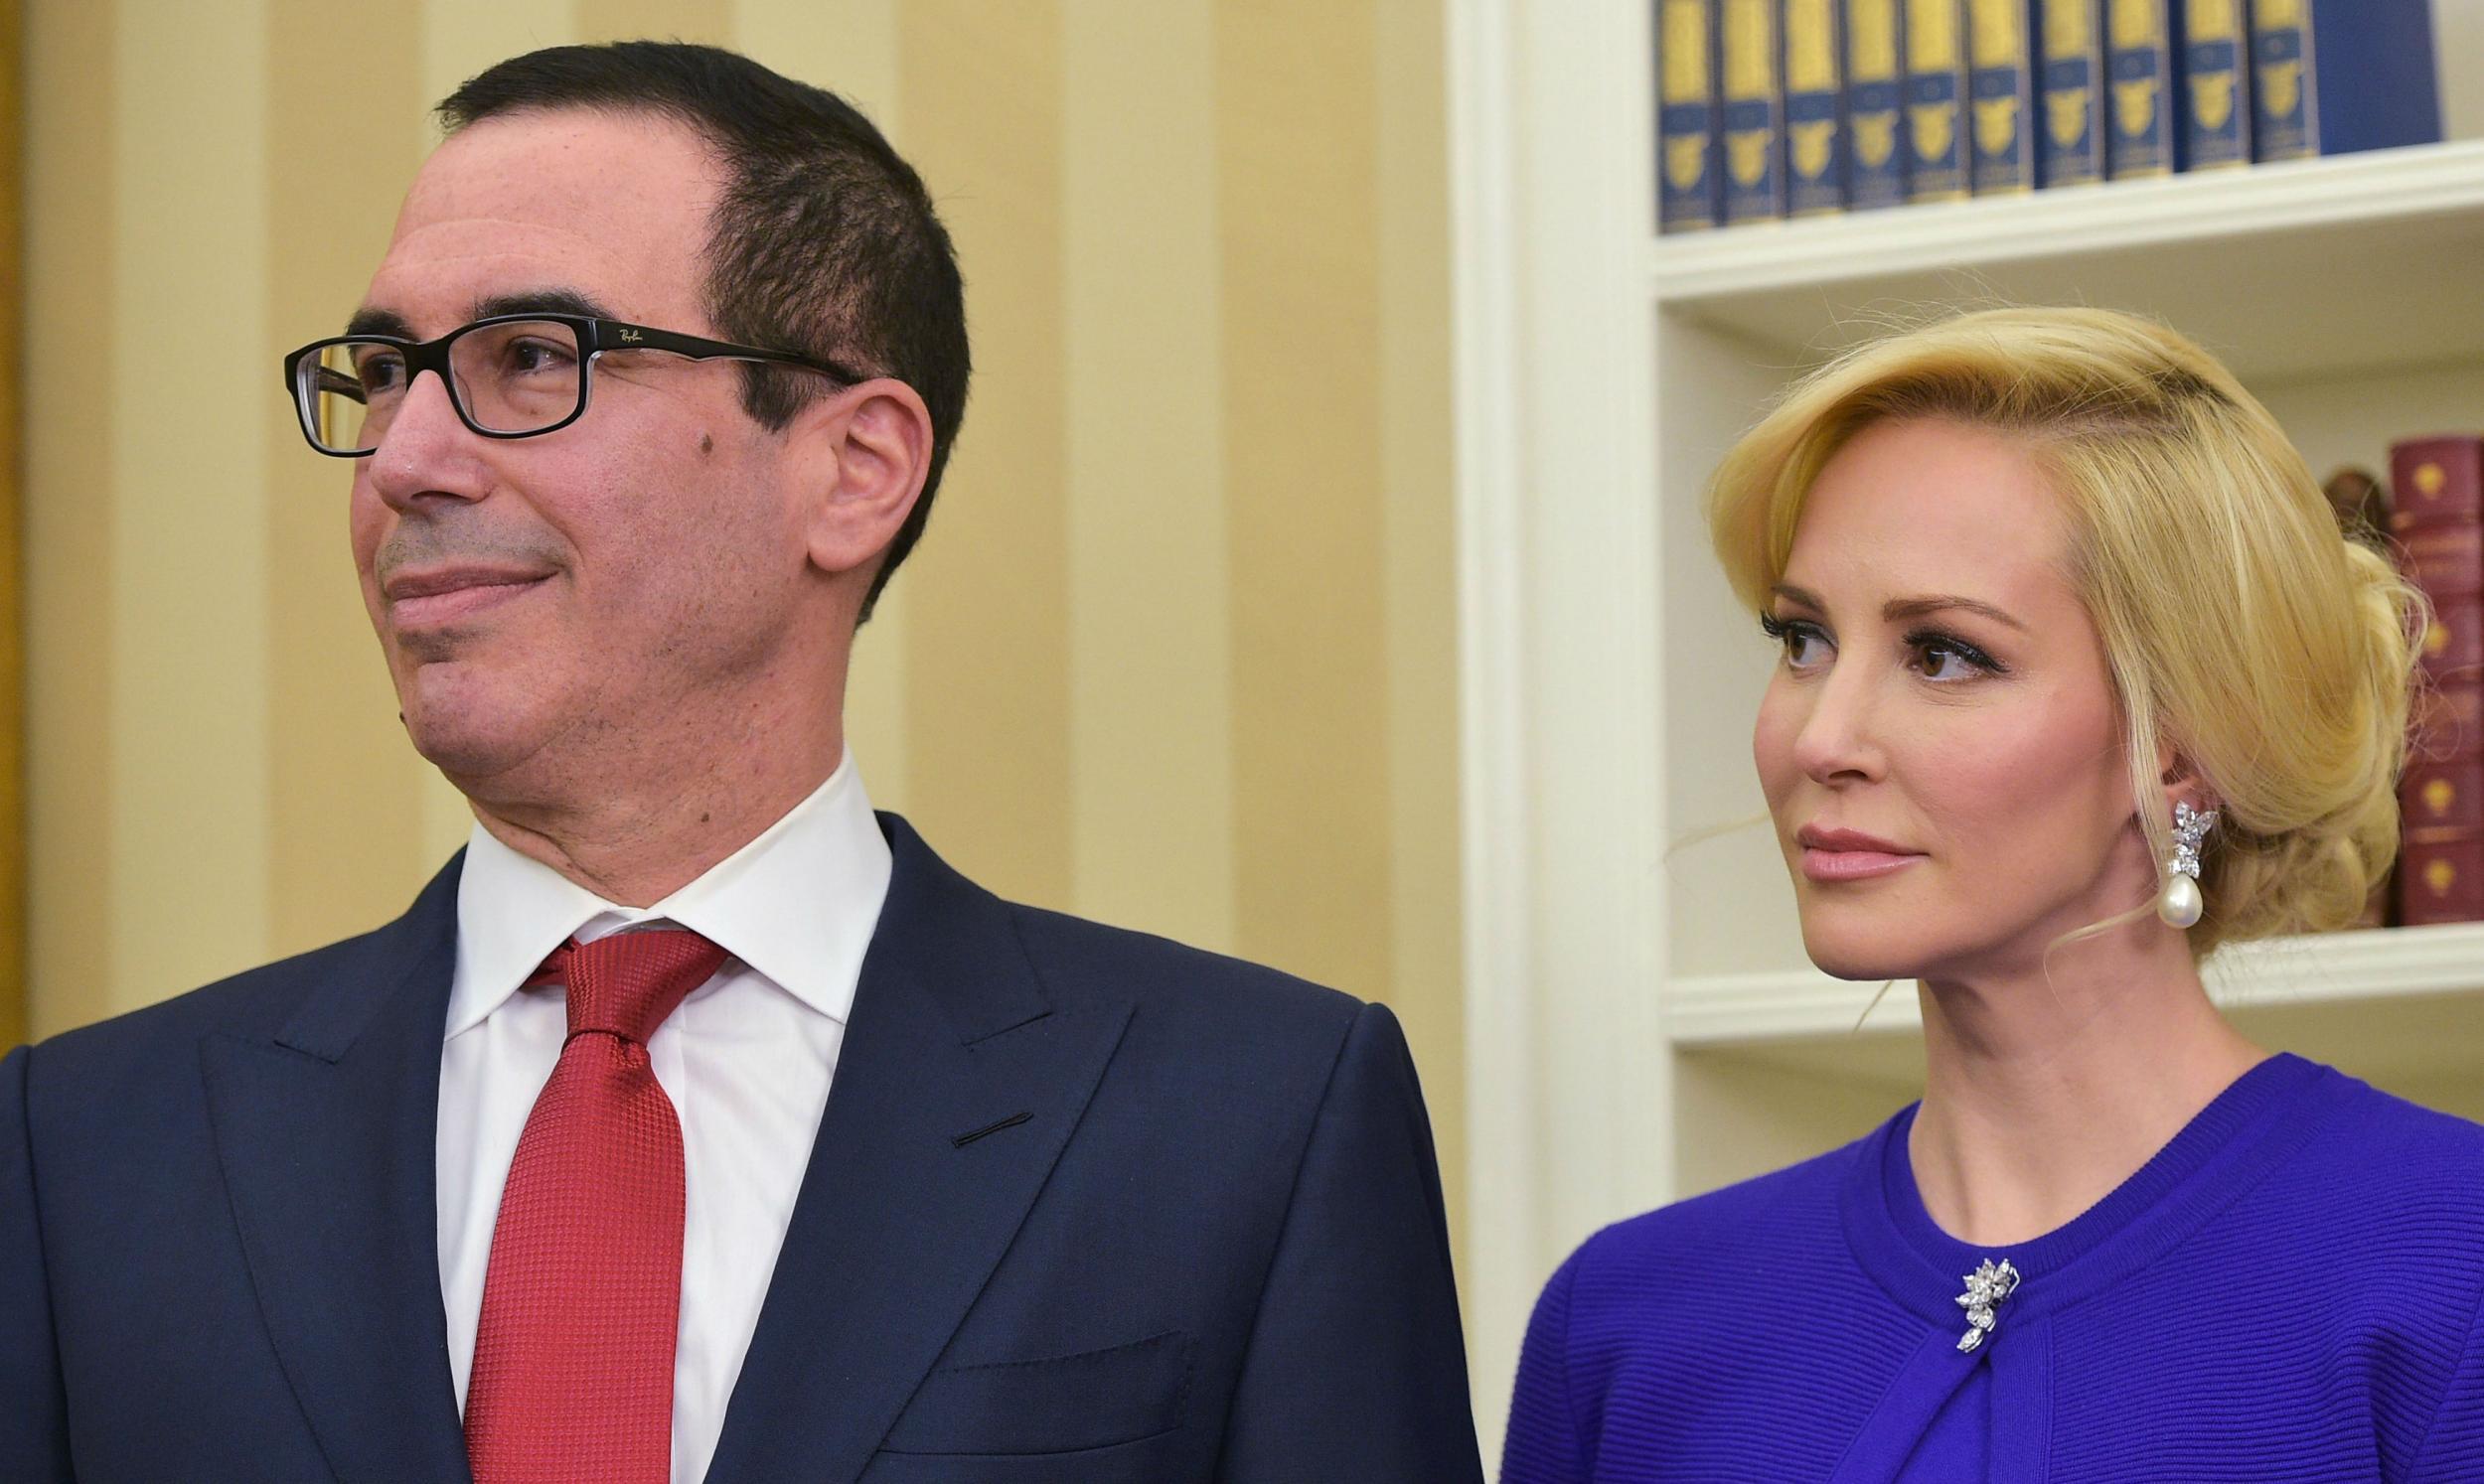 The Treasury Secretary is married to British actress Louise Linton